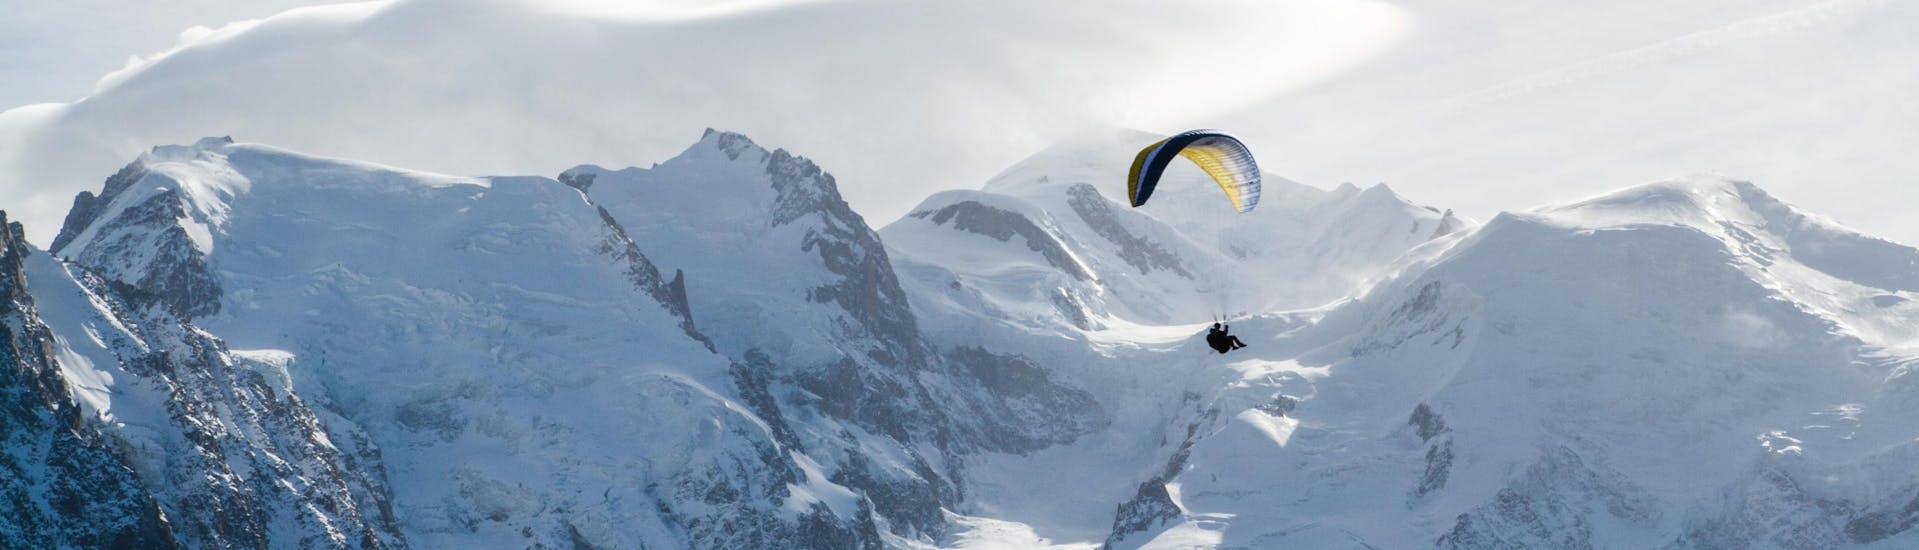 A person is doing a paragliding flight in the Chamonix valley from Aiguille du Midi with snowy mountains in the background.